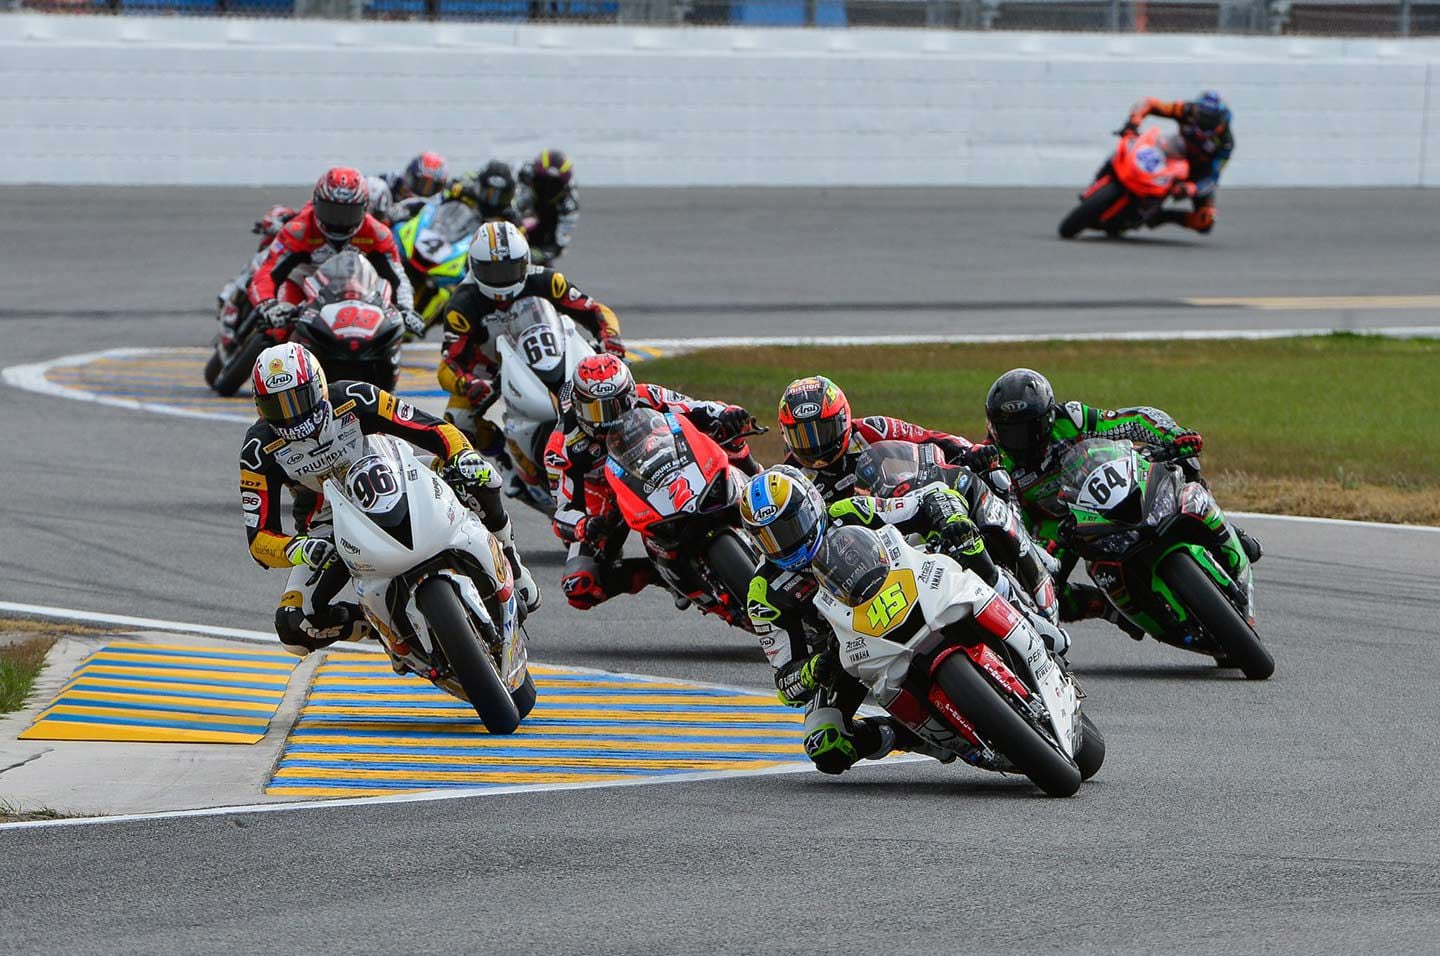 This year’s Daytona 200 will include 67 riders from 13 countries on five brands of motorcycles.